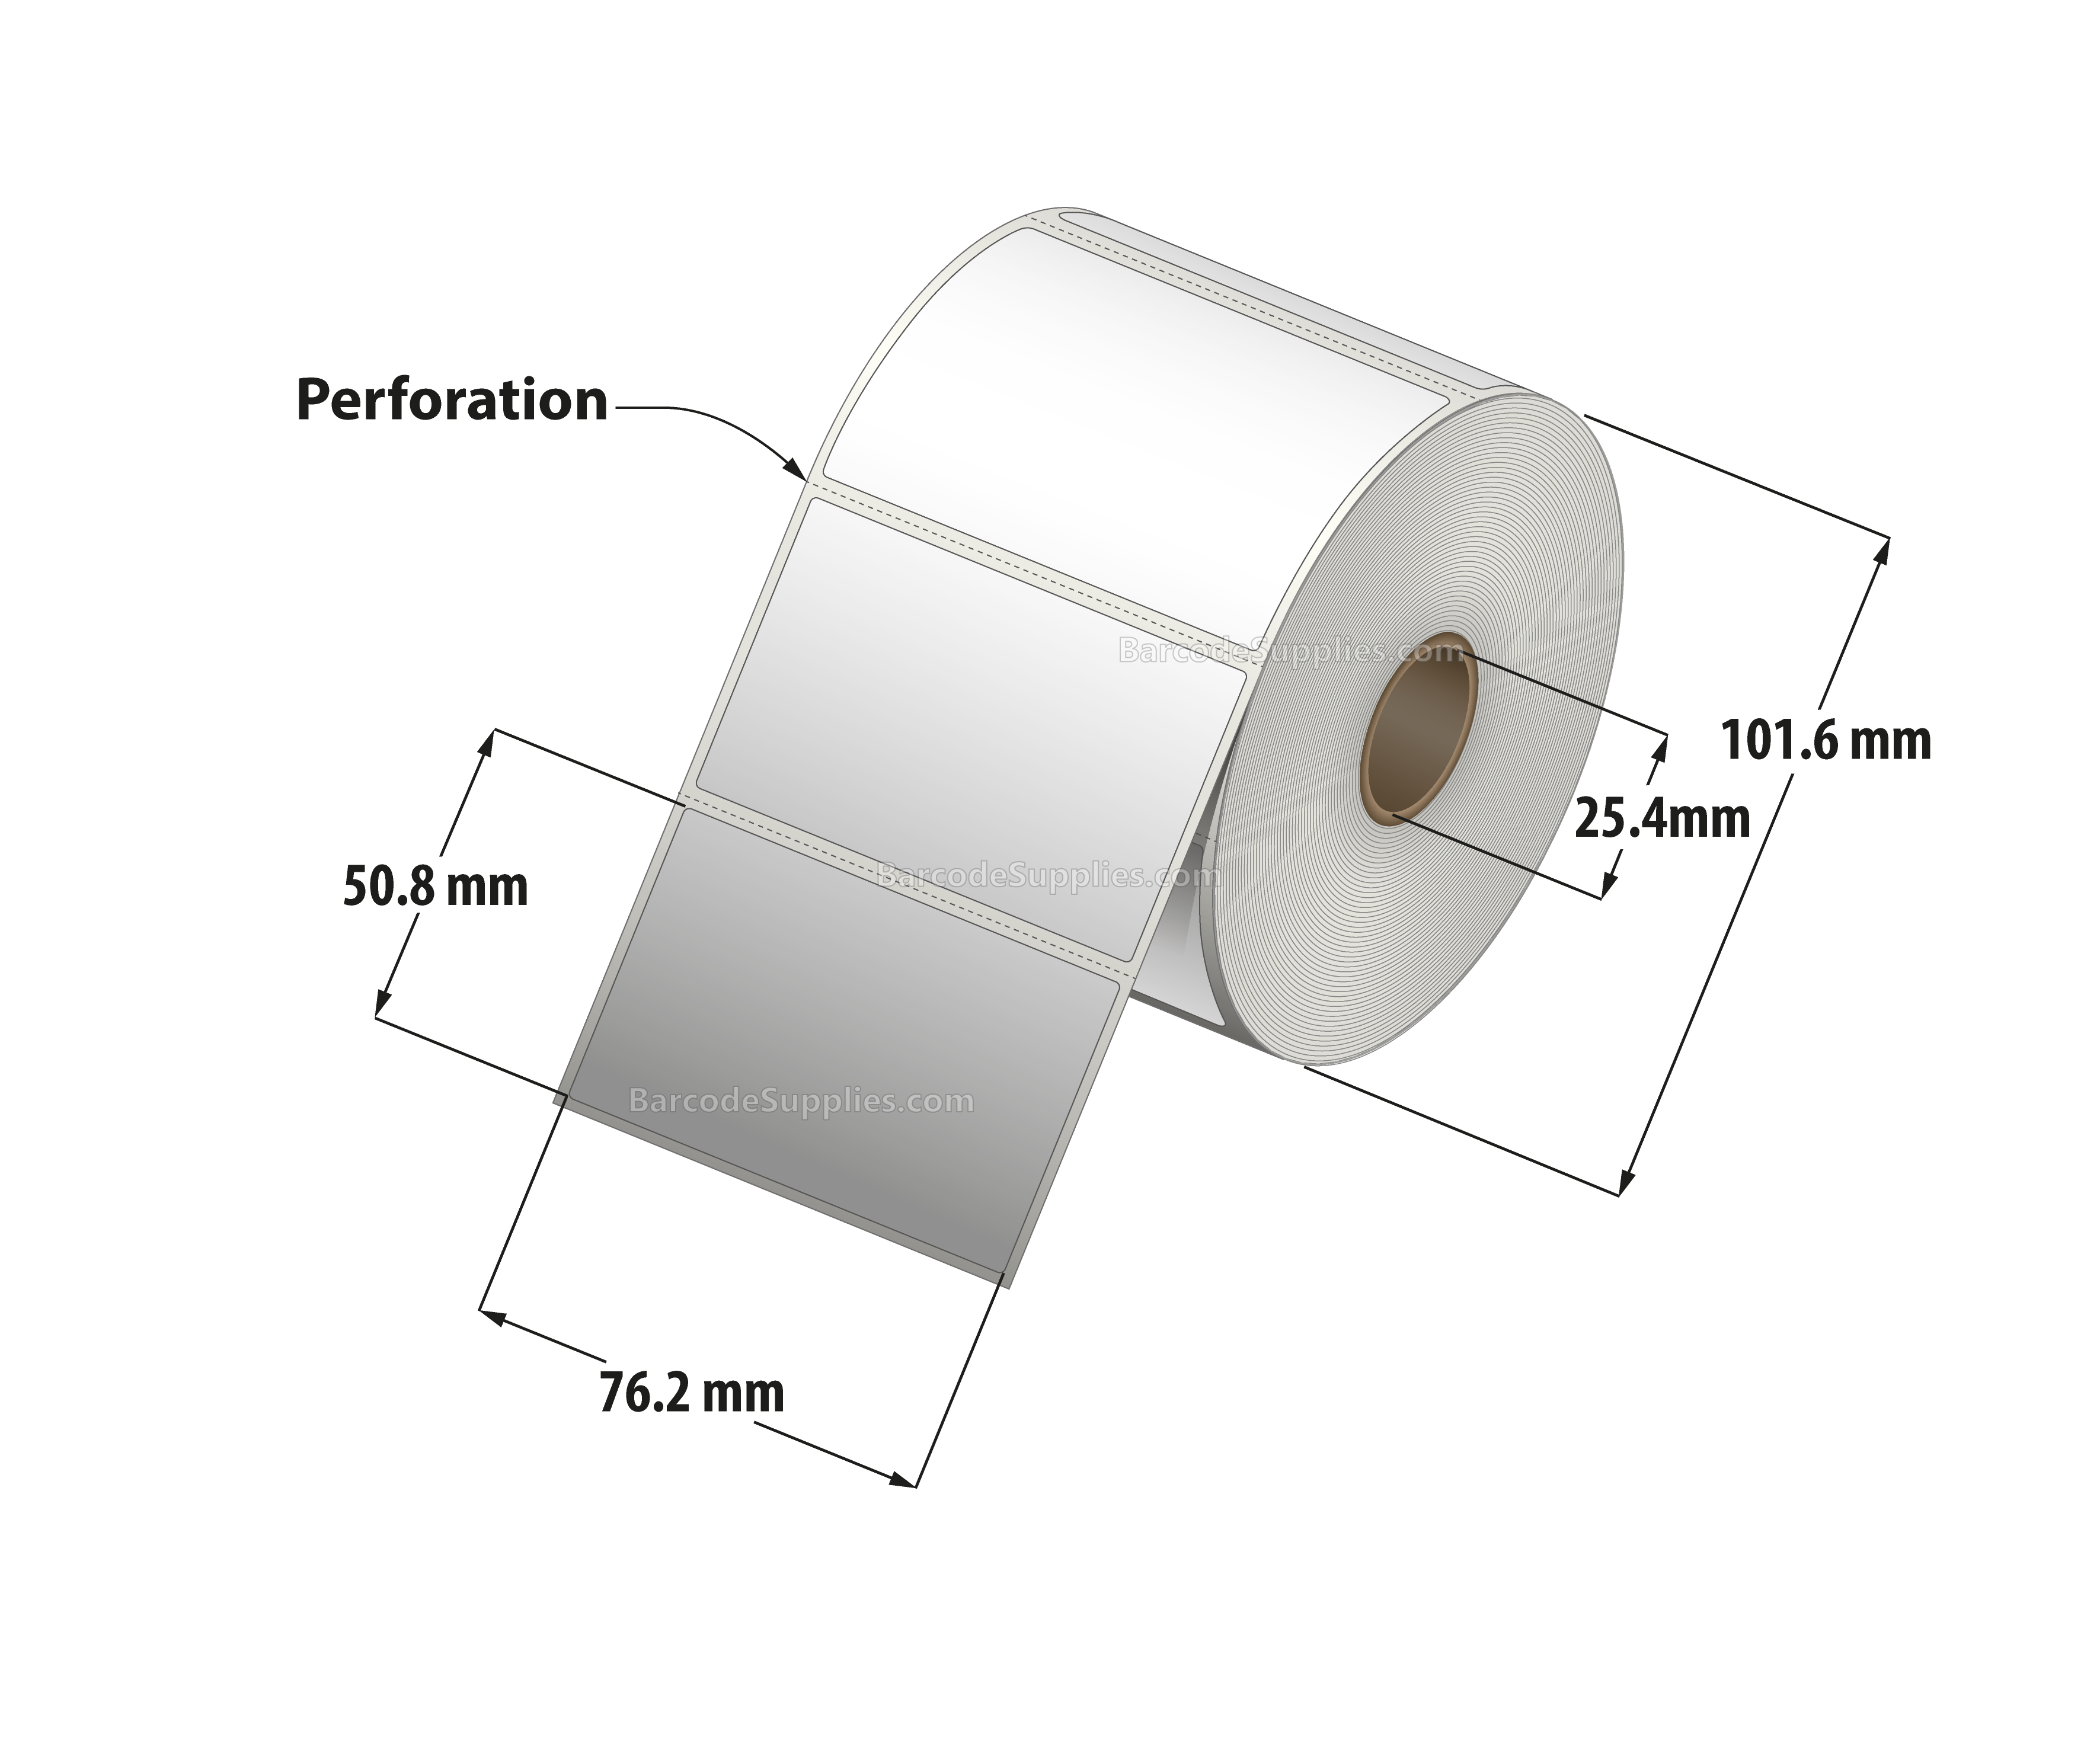 3 x 2 Thermal Transfer White Labels With Permanent Adhesive - Perforated - 735 Labels Per Roll - Carton Of 12 Rolls - 8820 Labels Total - MPN: RT-3-2-735-1 - BarcodeSource, Inc.